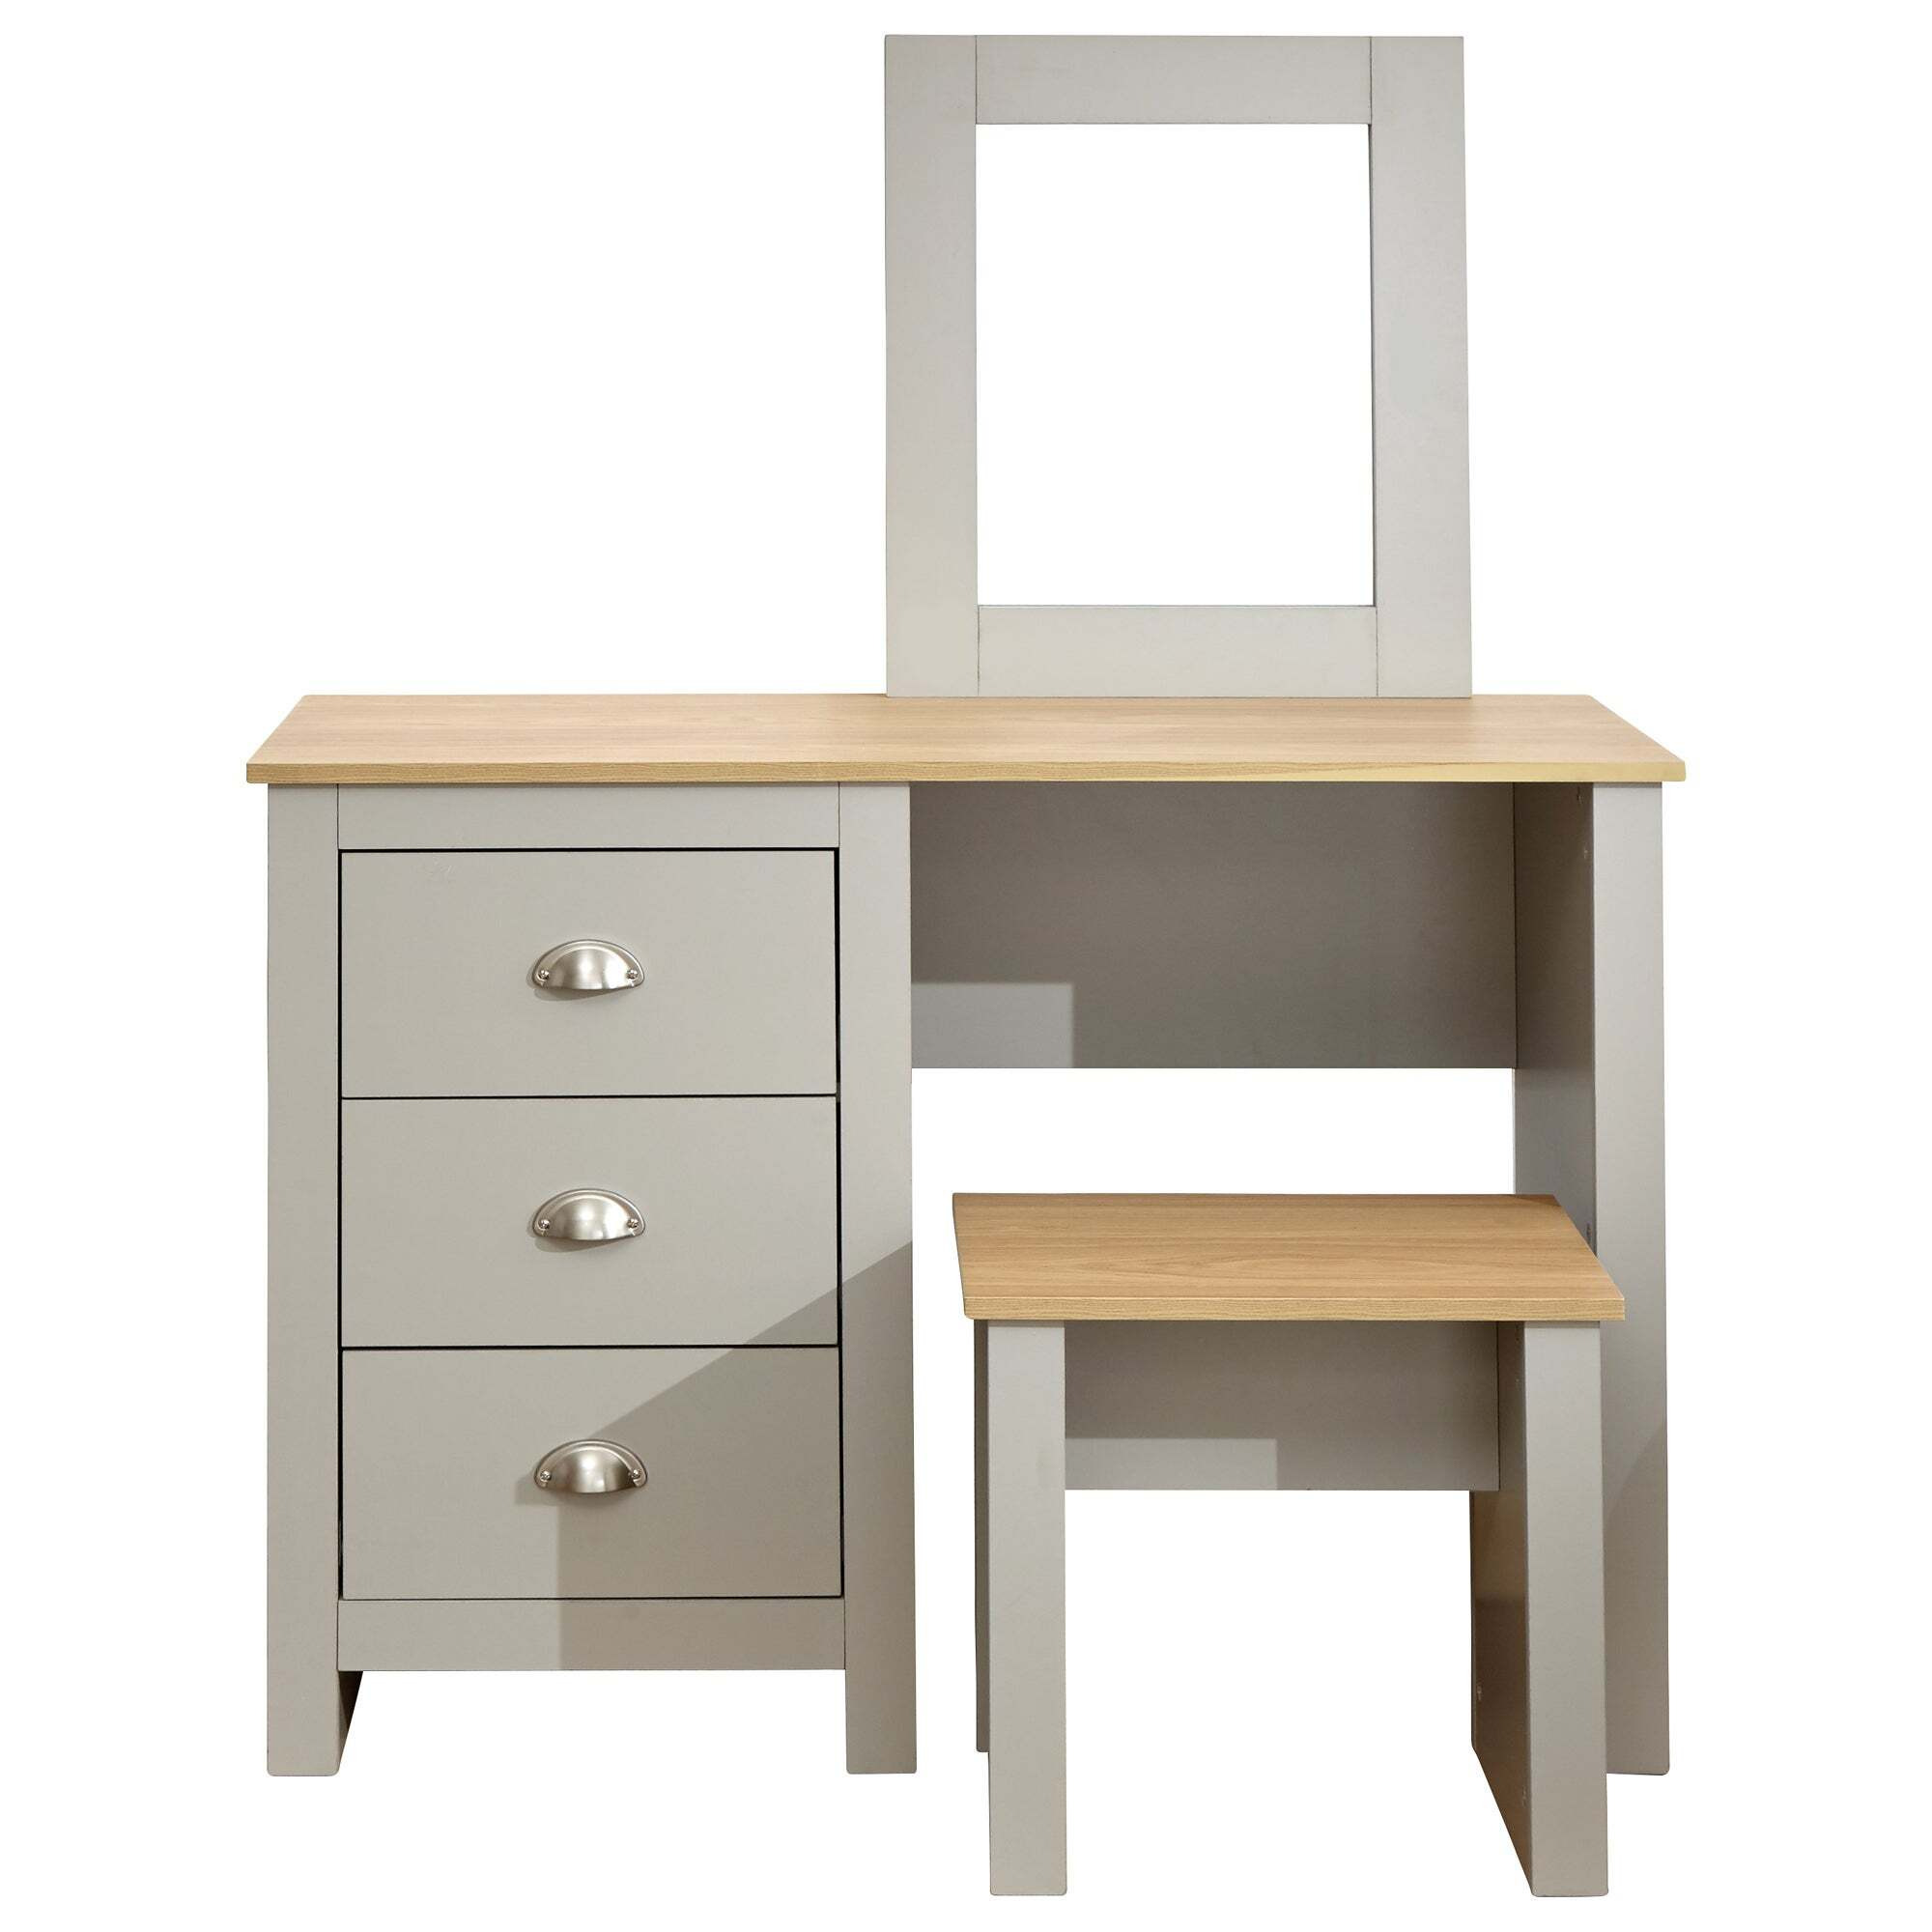 Lancaster 3 Drawer Dressing Table Set with Mirror Grey